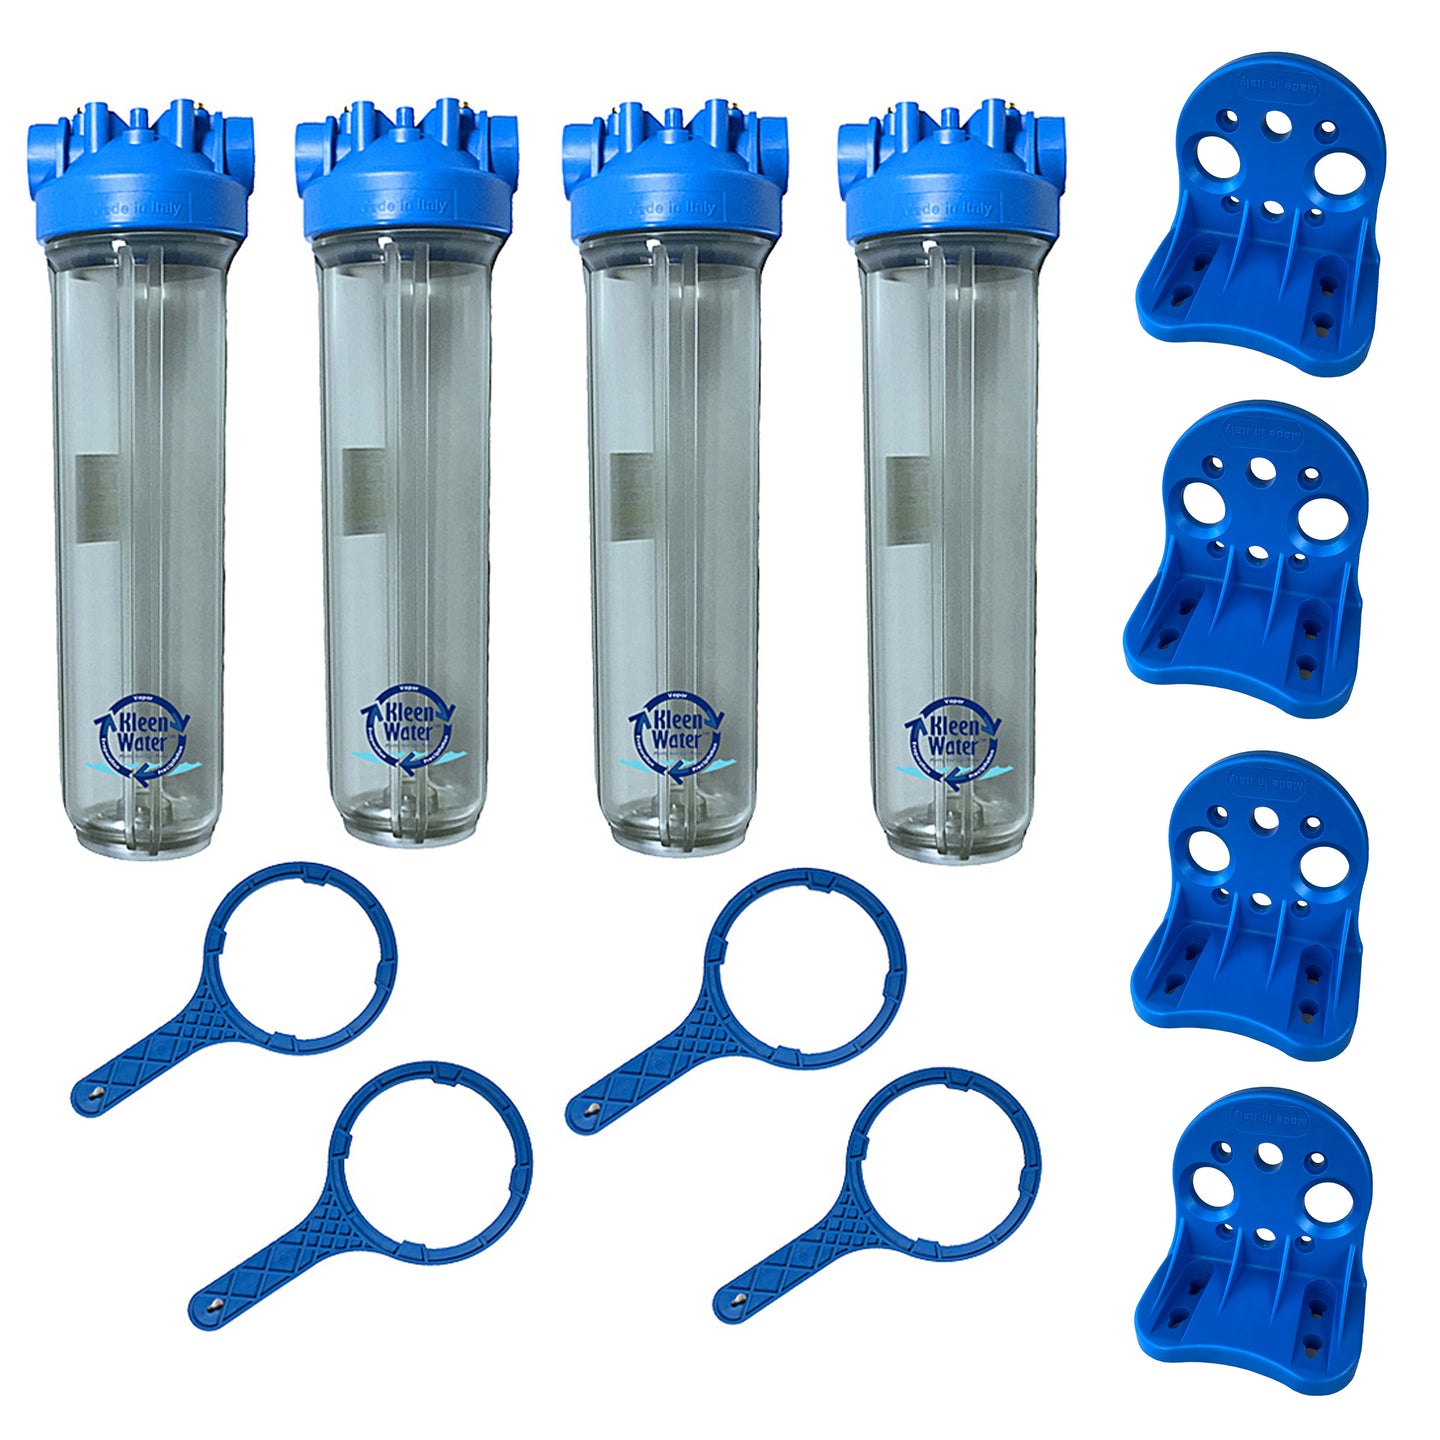 Professional Installer Multi Whole House Water Filter Set - 4.5 x 20